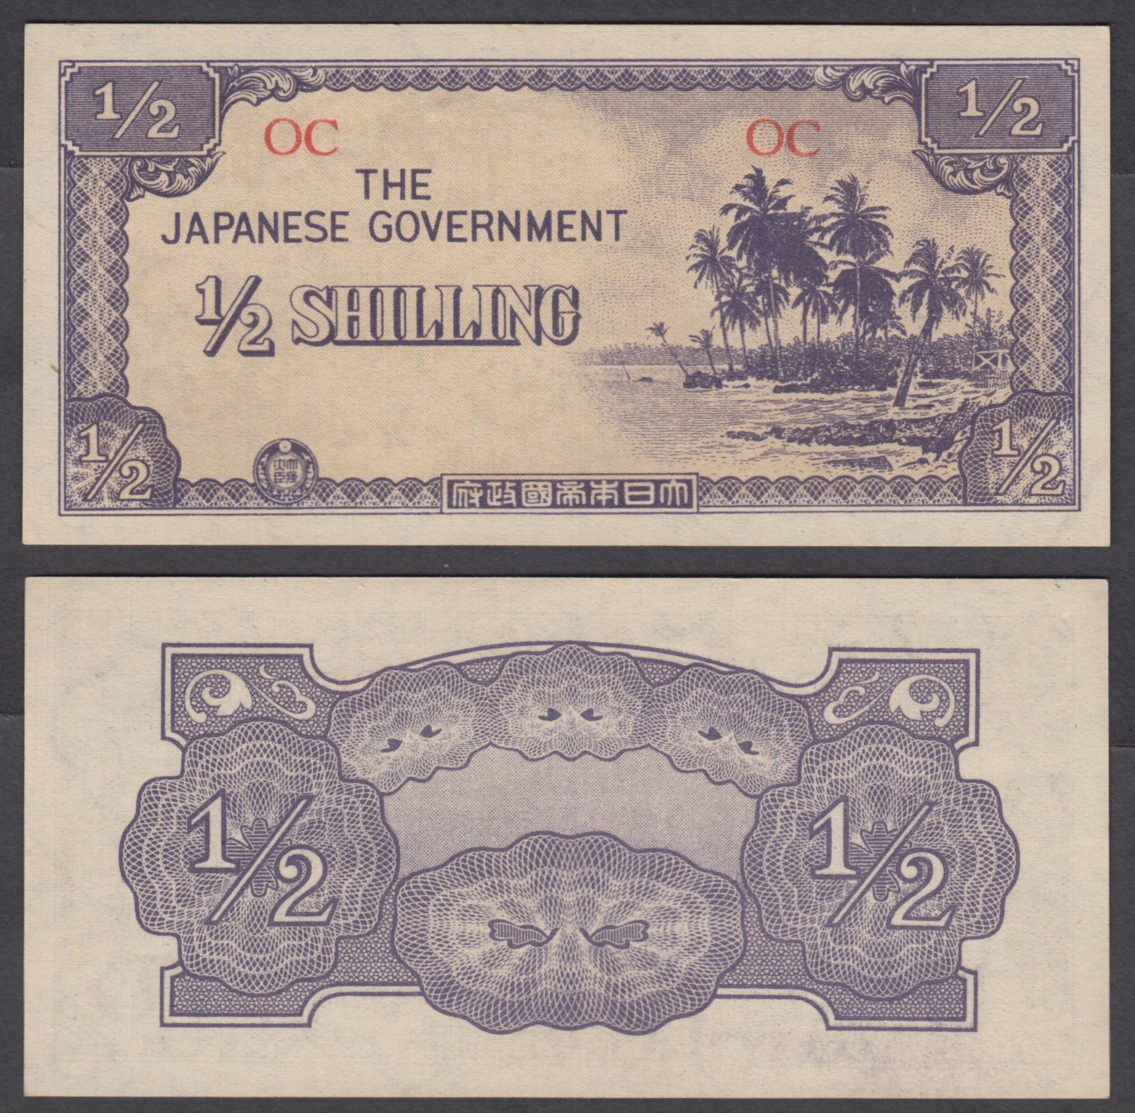 Oceania 1/2 Shilling ND 1942 UNC CRISP Banknote Japanese Occ. WWII P-1 - Other - Oceania